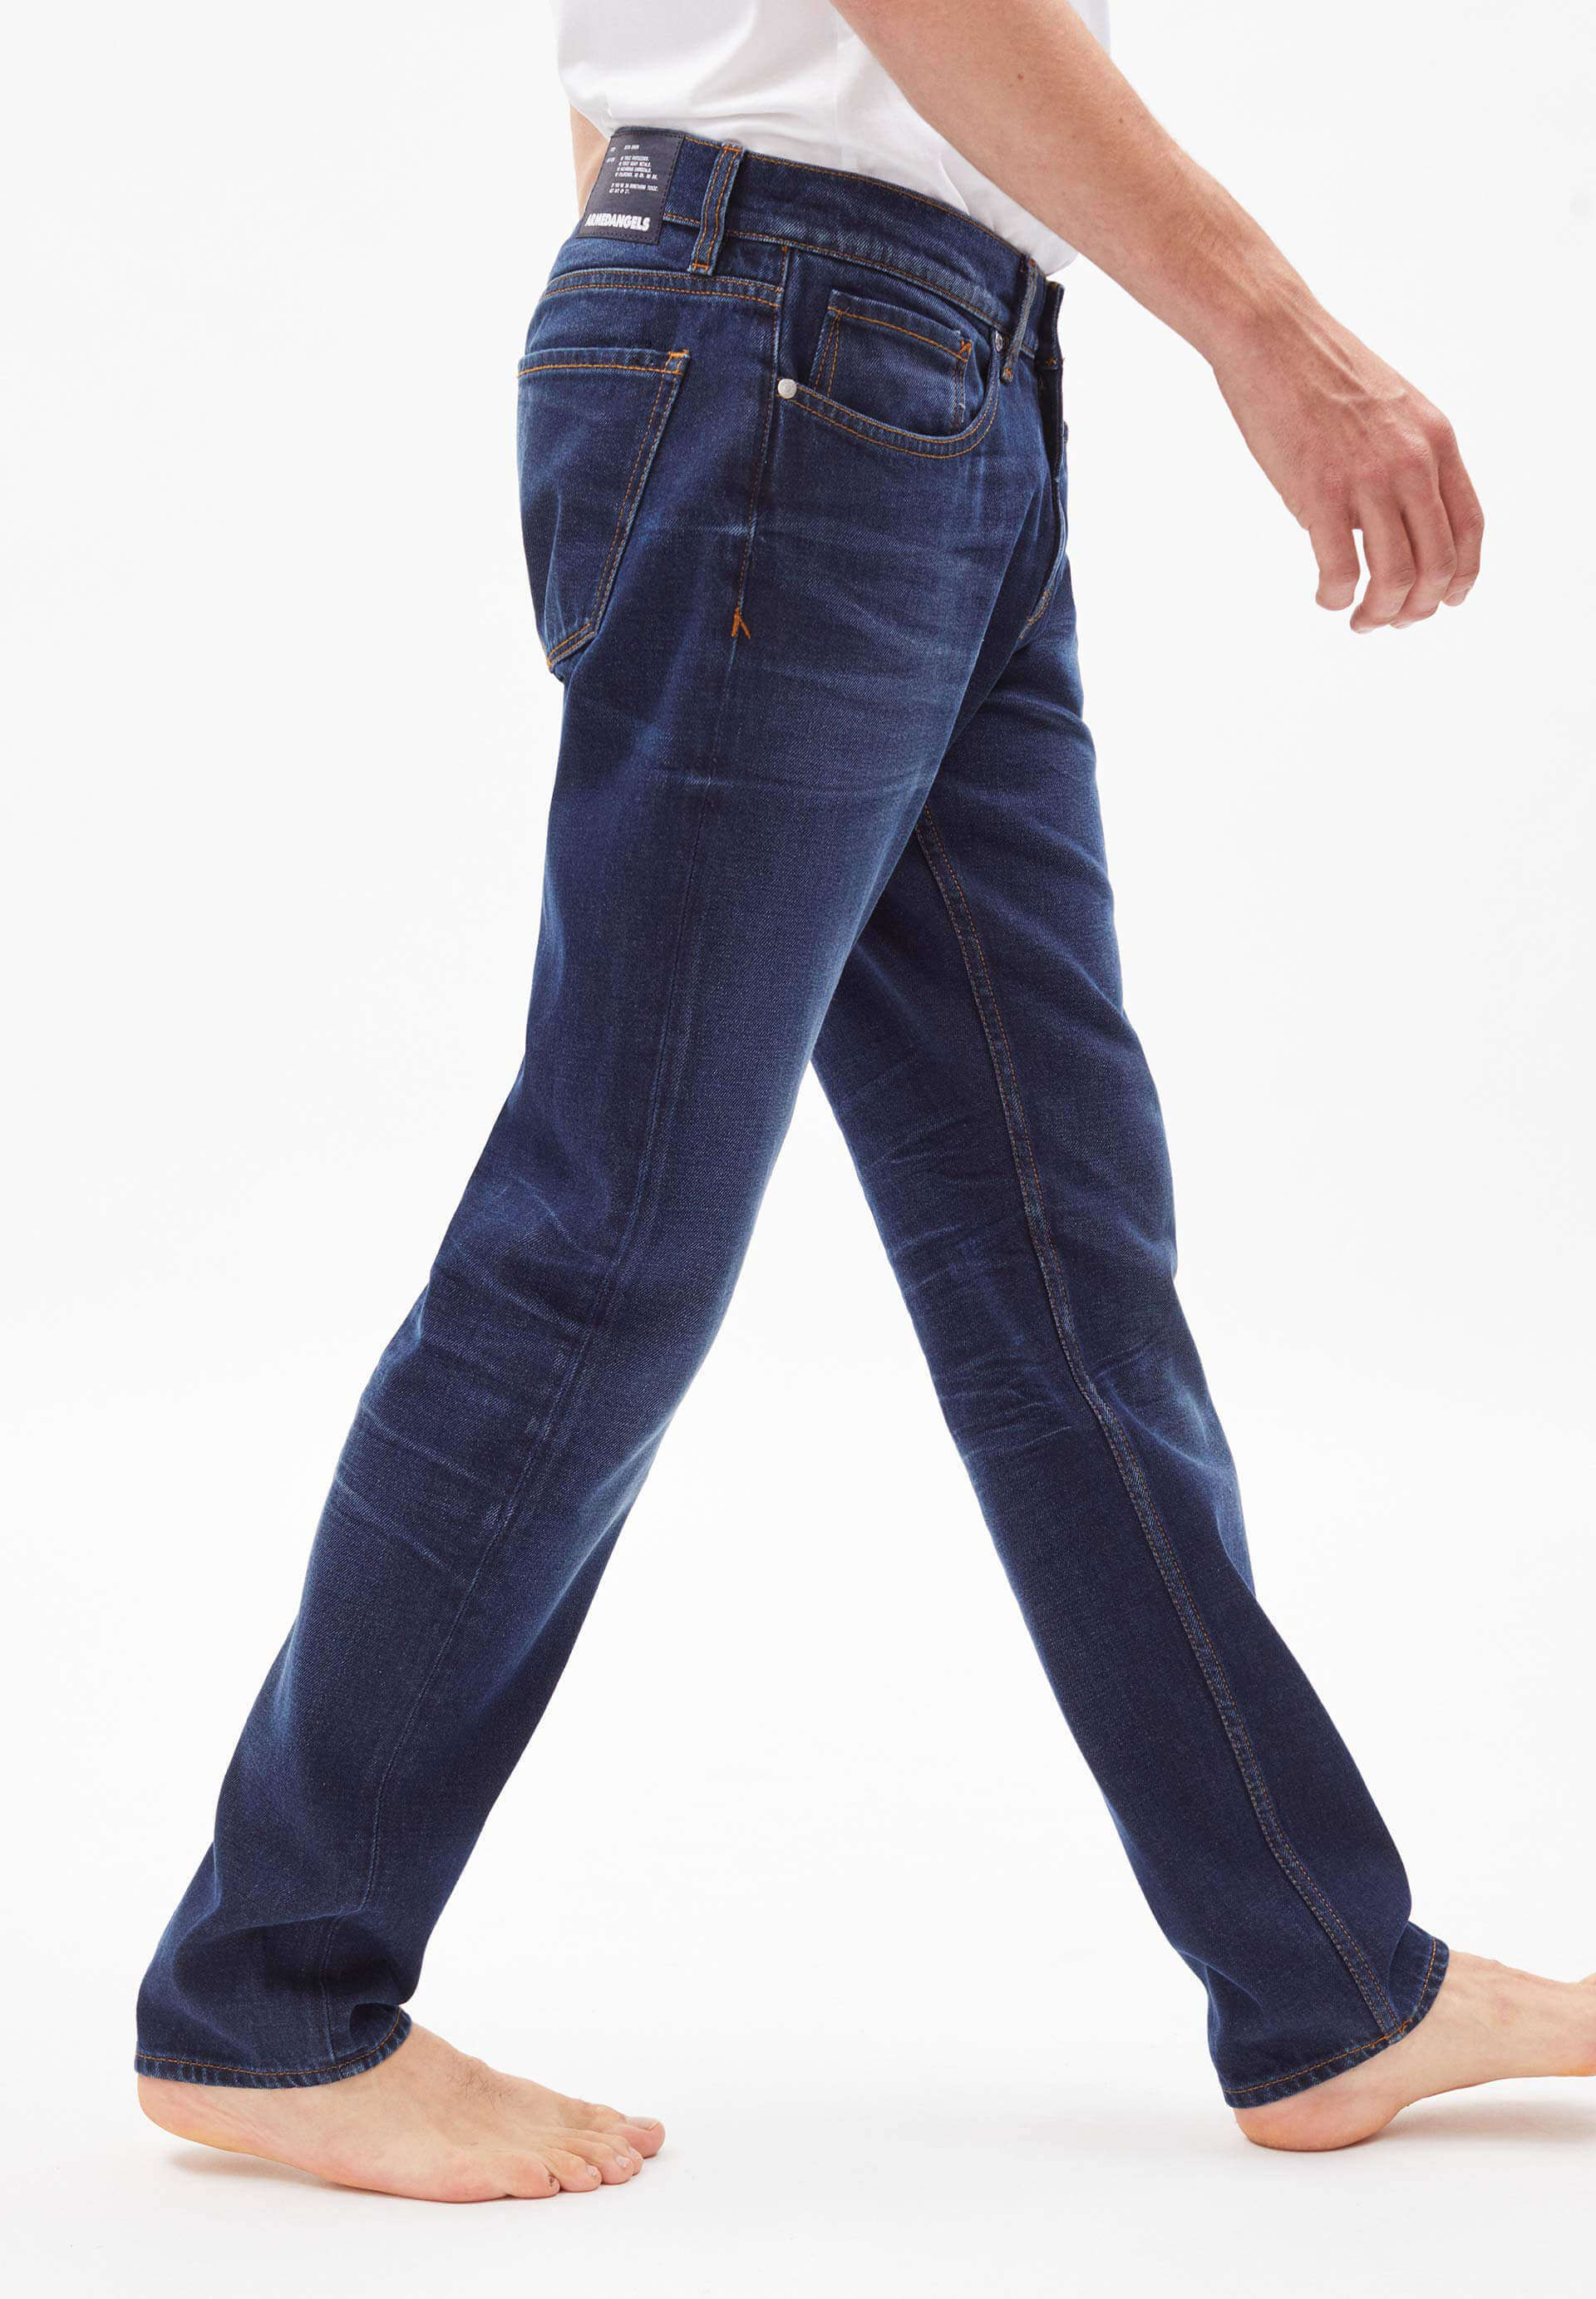 ARMEDANGELS Jeans Dylaano Straight Fit arlo blue 31/34